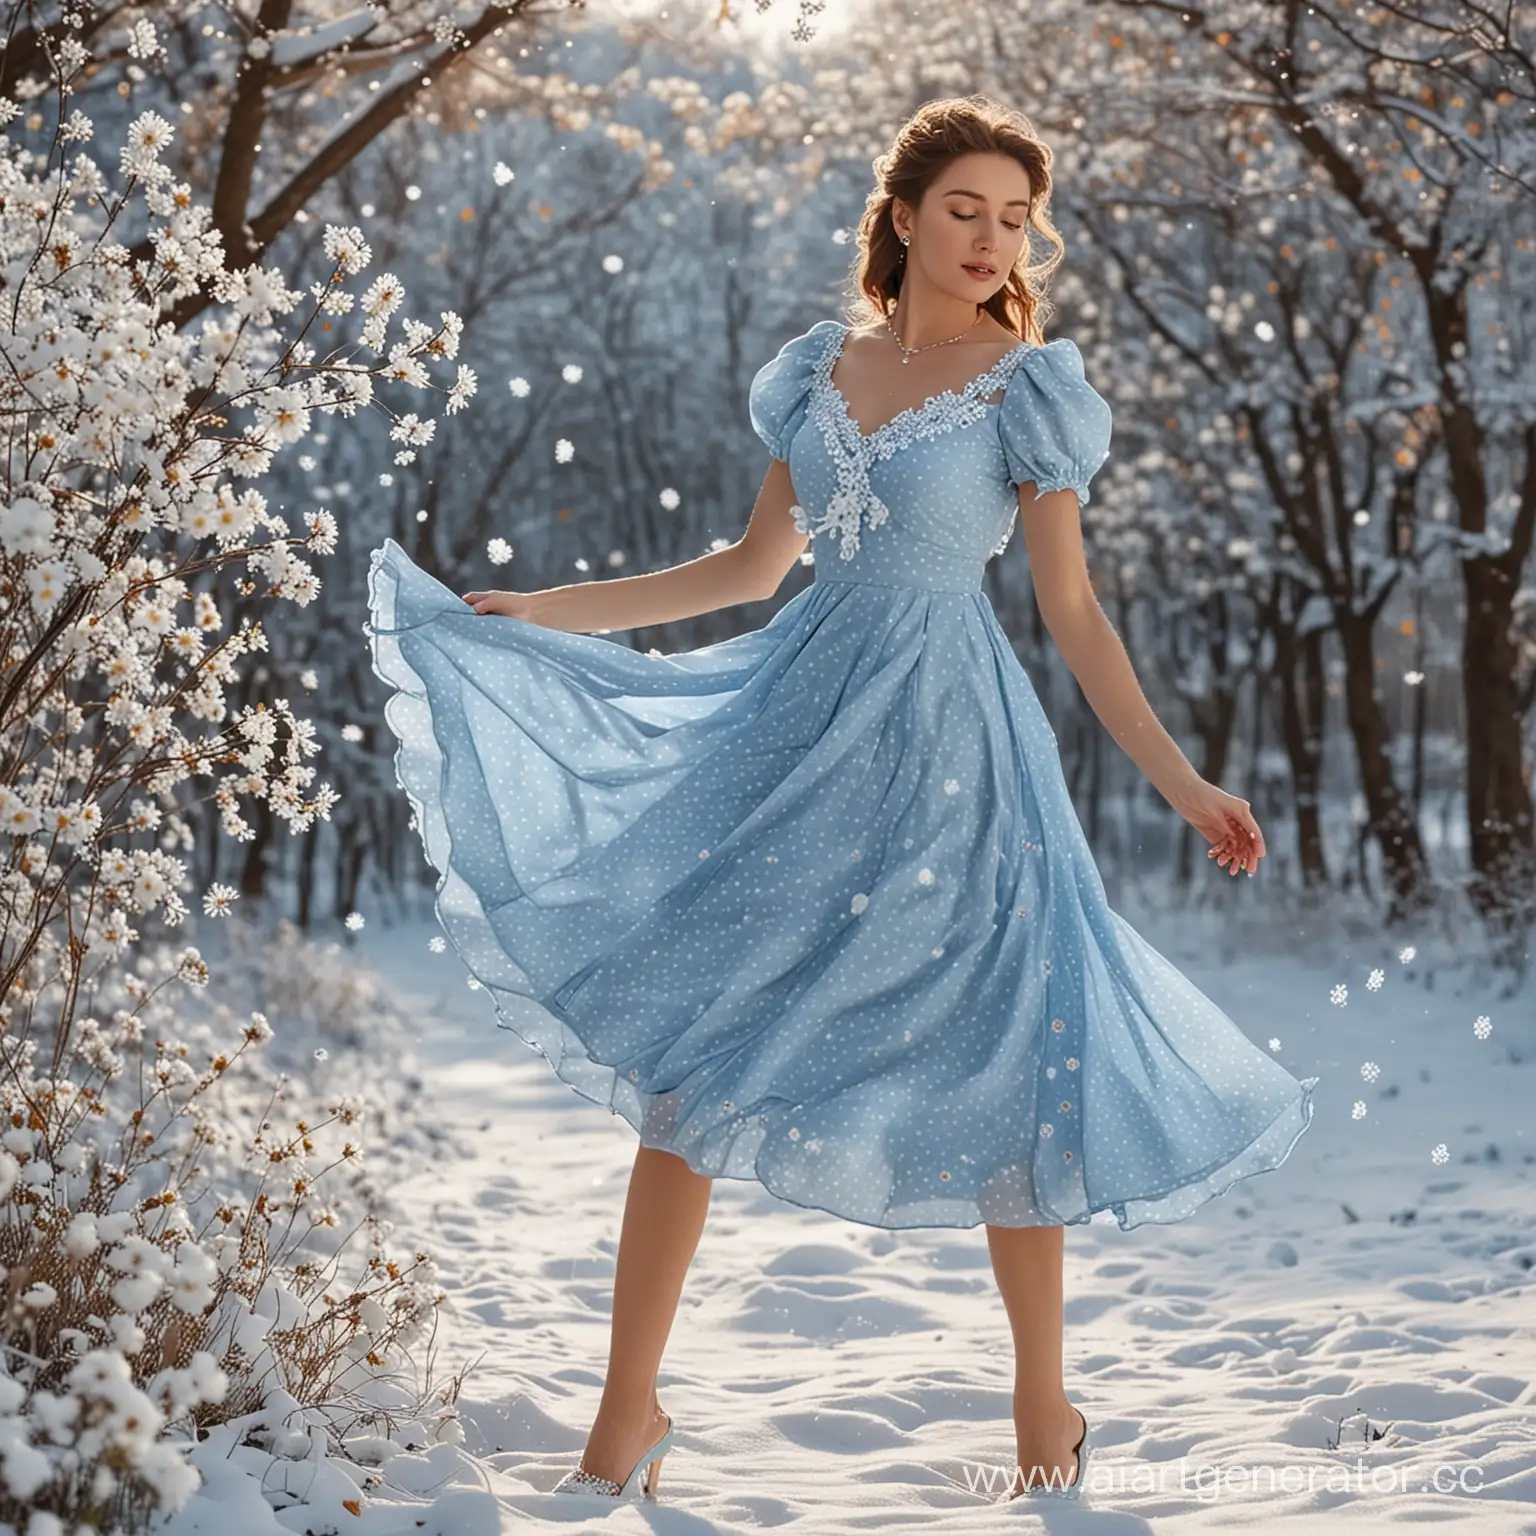 AlincatheBeauty-Dancing-Amidst-Snowflakes-and-Flowers-in-a-Stunning-Light-Blue-Polka-Dot-Dress